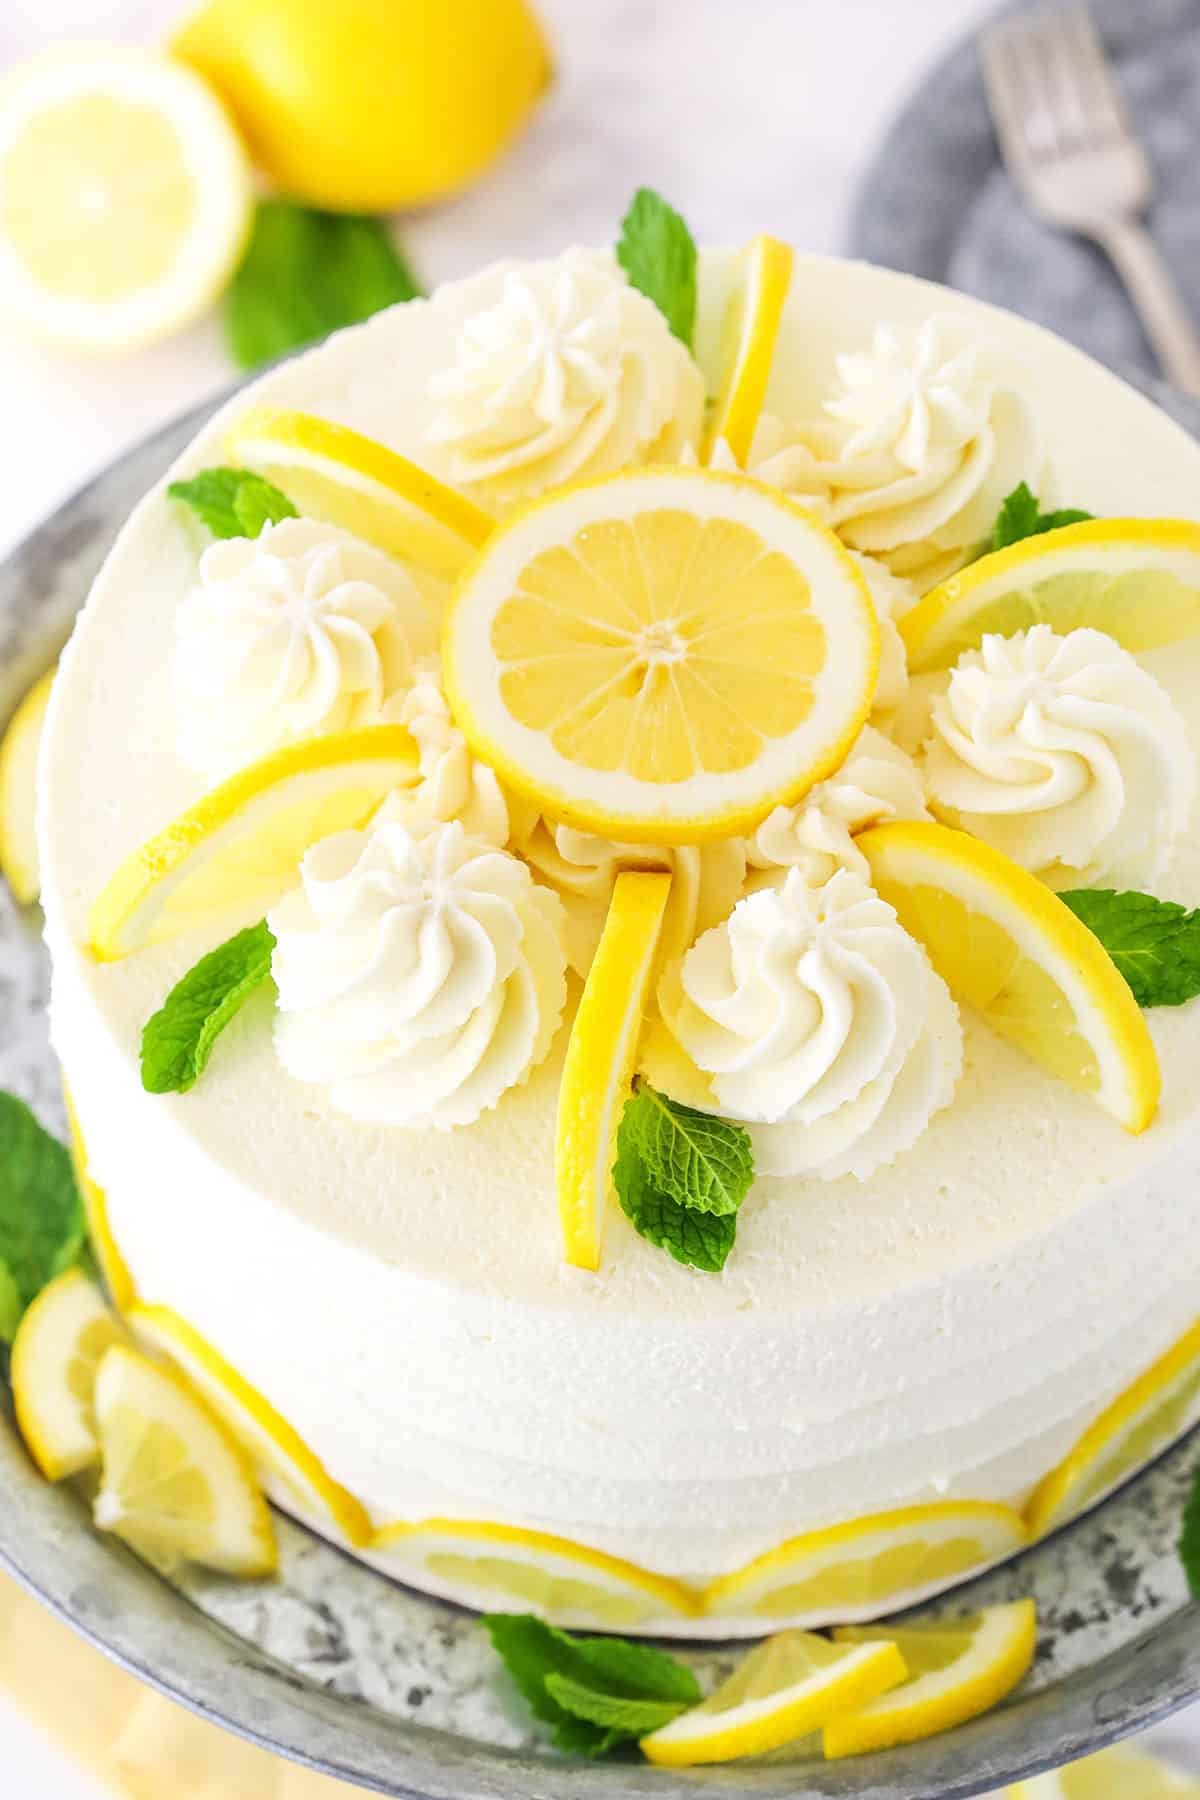 Overhead view of a full Lemon Mascarpone Layer Cake topped with white swirls and cut lemons on a metal colored cake stand